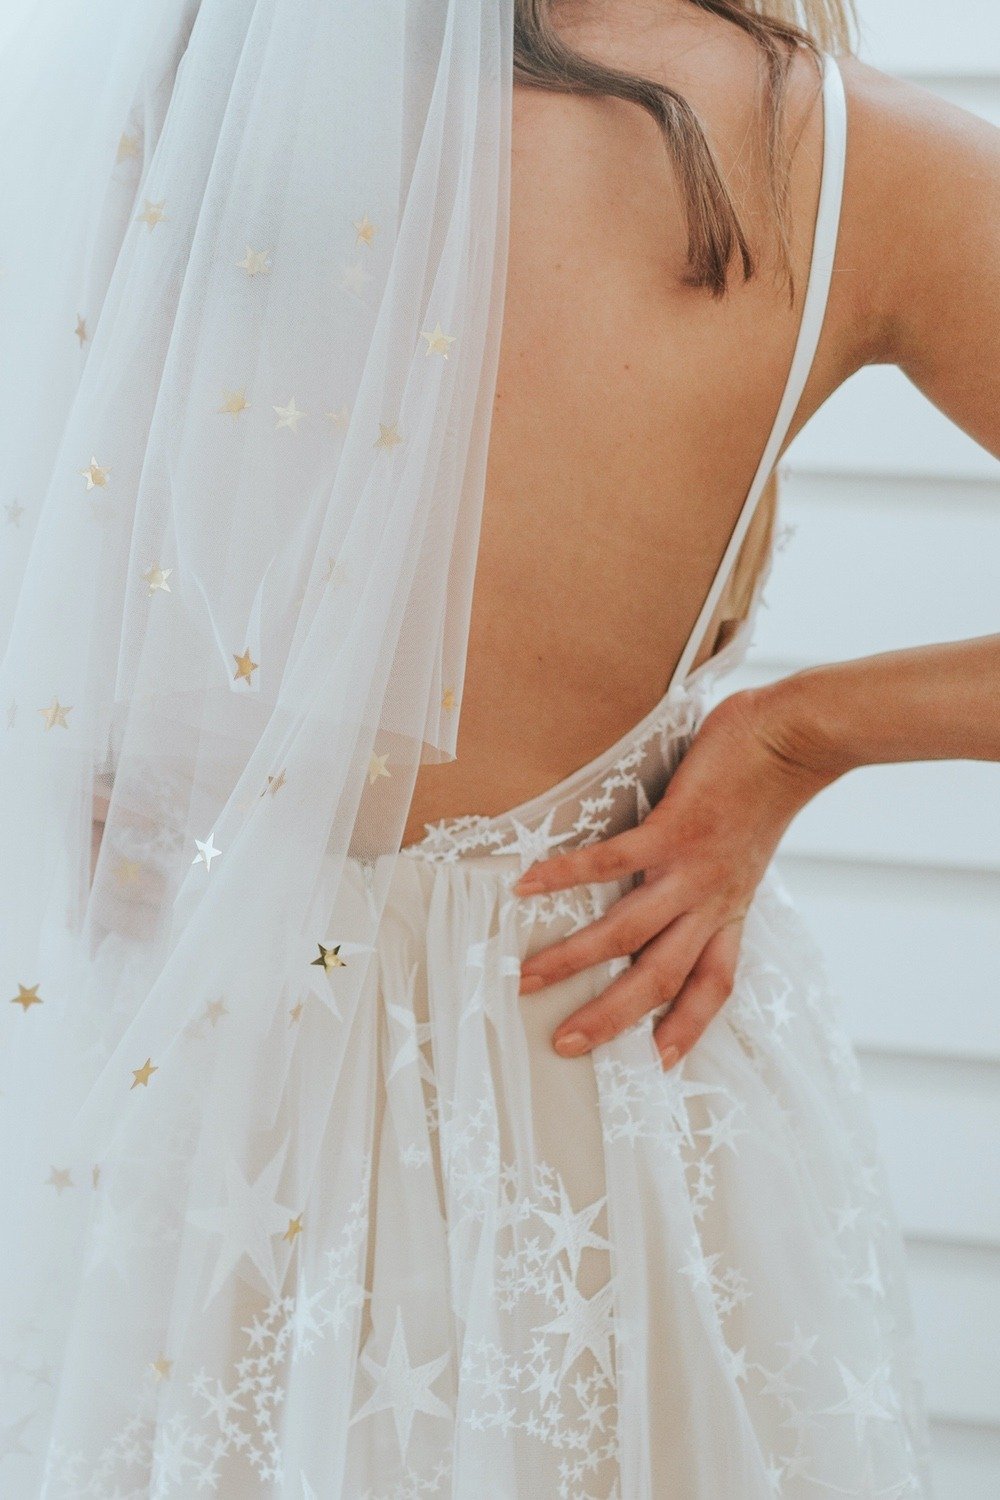 Star wedding veil from Luna Willow Bridal Dress Collection